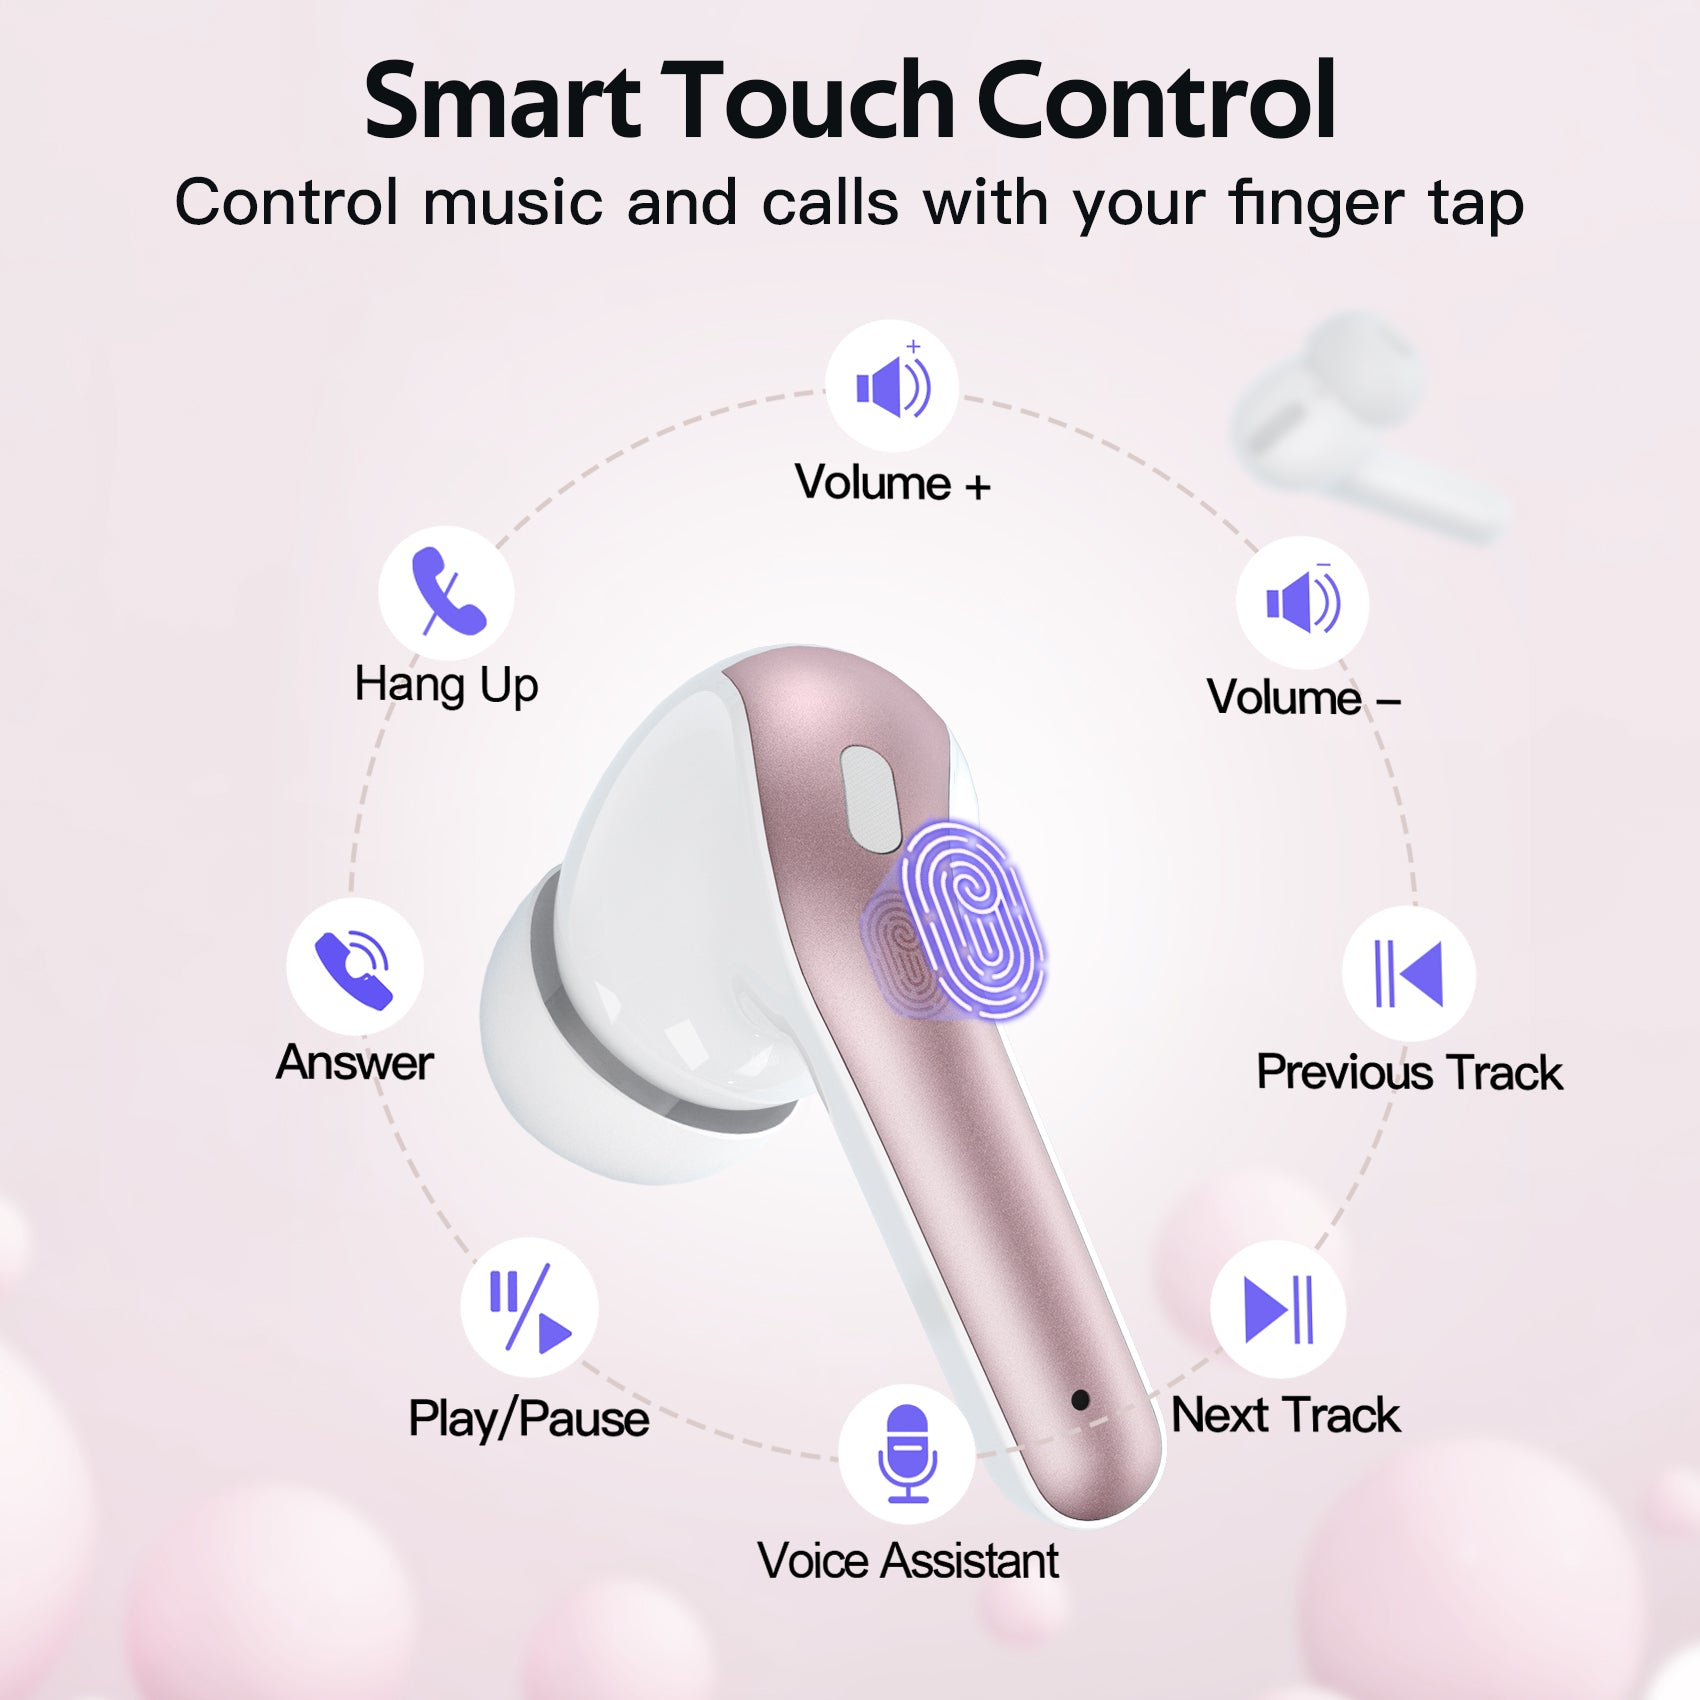 TAGRY Bluetooth Headphones True Wireless Earbuds 60H Playback LED Power Display Earphones with Wireless Charging Case IPX5 Waterproof in-Ear Earbuds with Mic for TV Smart Phone Computer Laptop Sports Pink